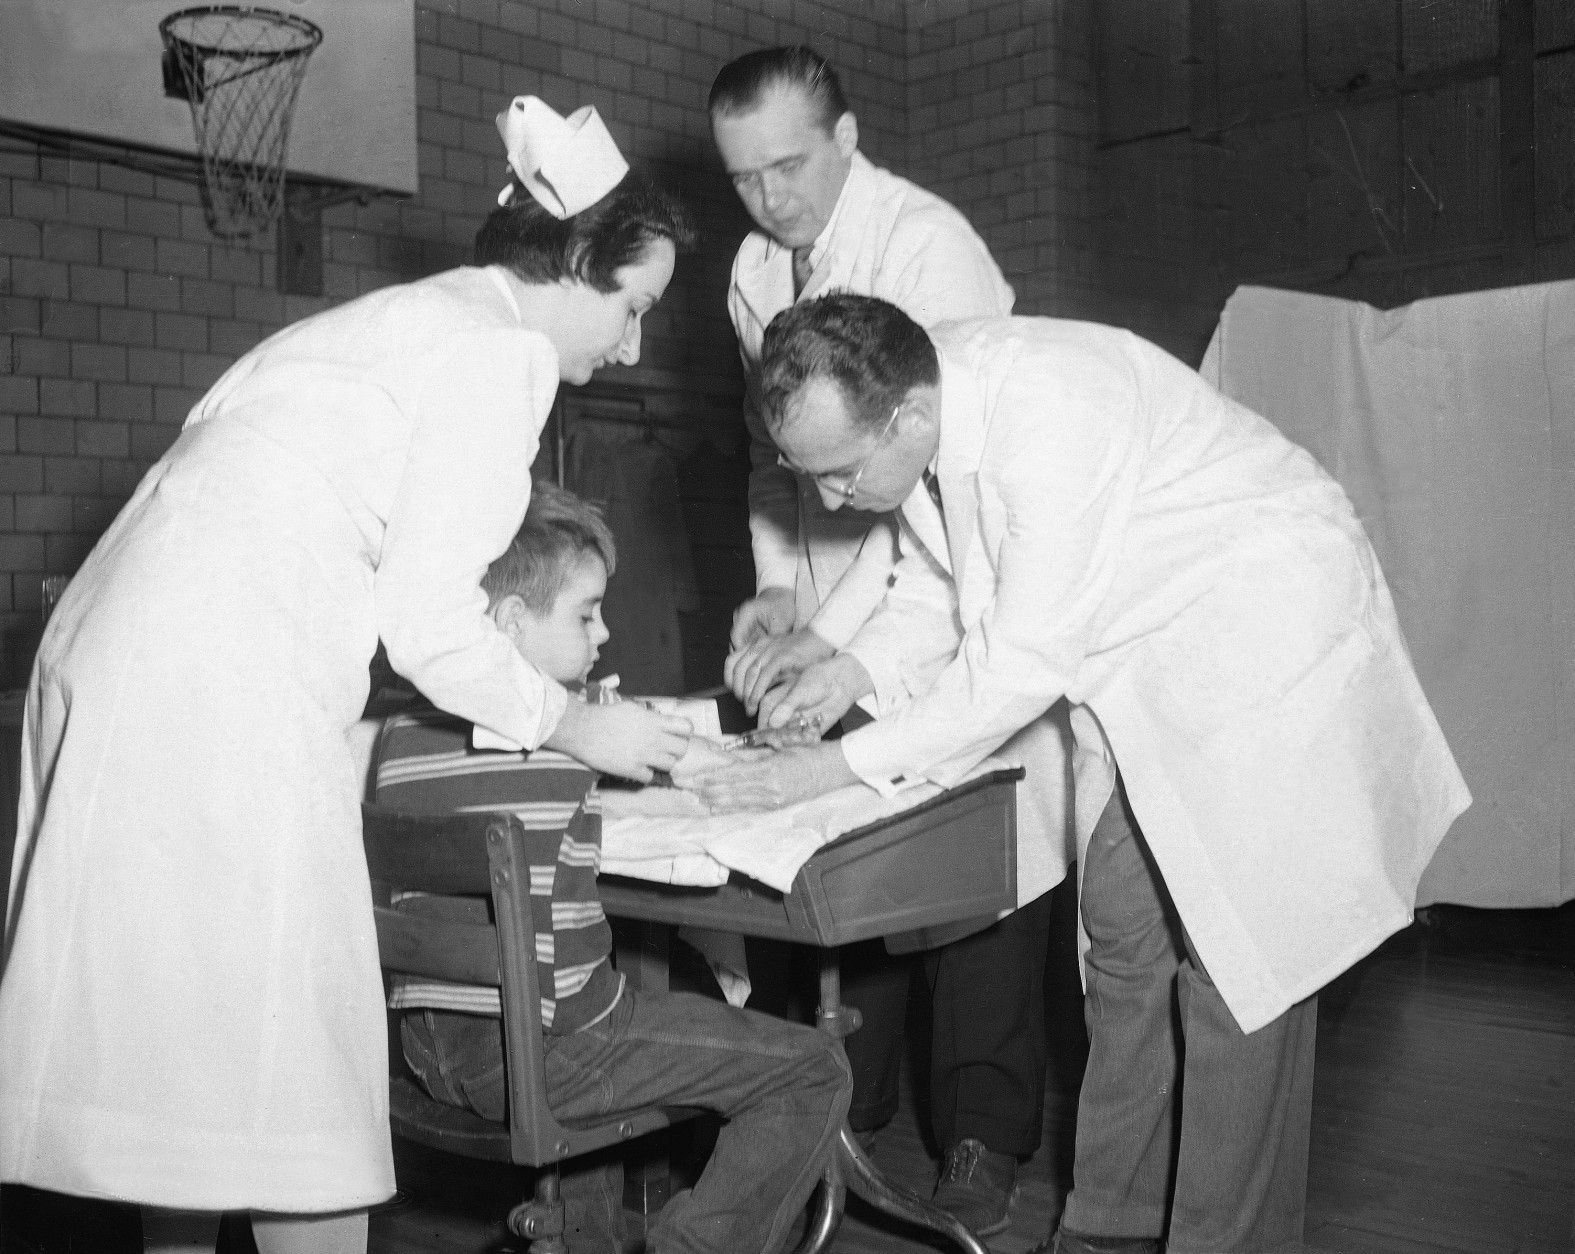 Dr. Jonas Salk, Pittsburgh scientist who discovered the Polio vaccine, administers an injection to an unidentified boy at Arsenal Elementary School in Pittsbrugh, Pa., Feb. 23, 1954.  (AP Photo)